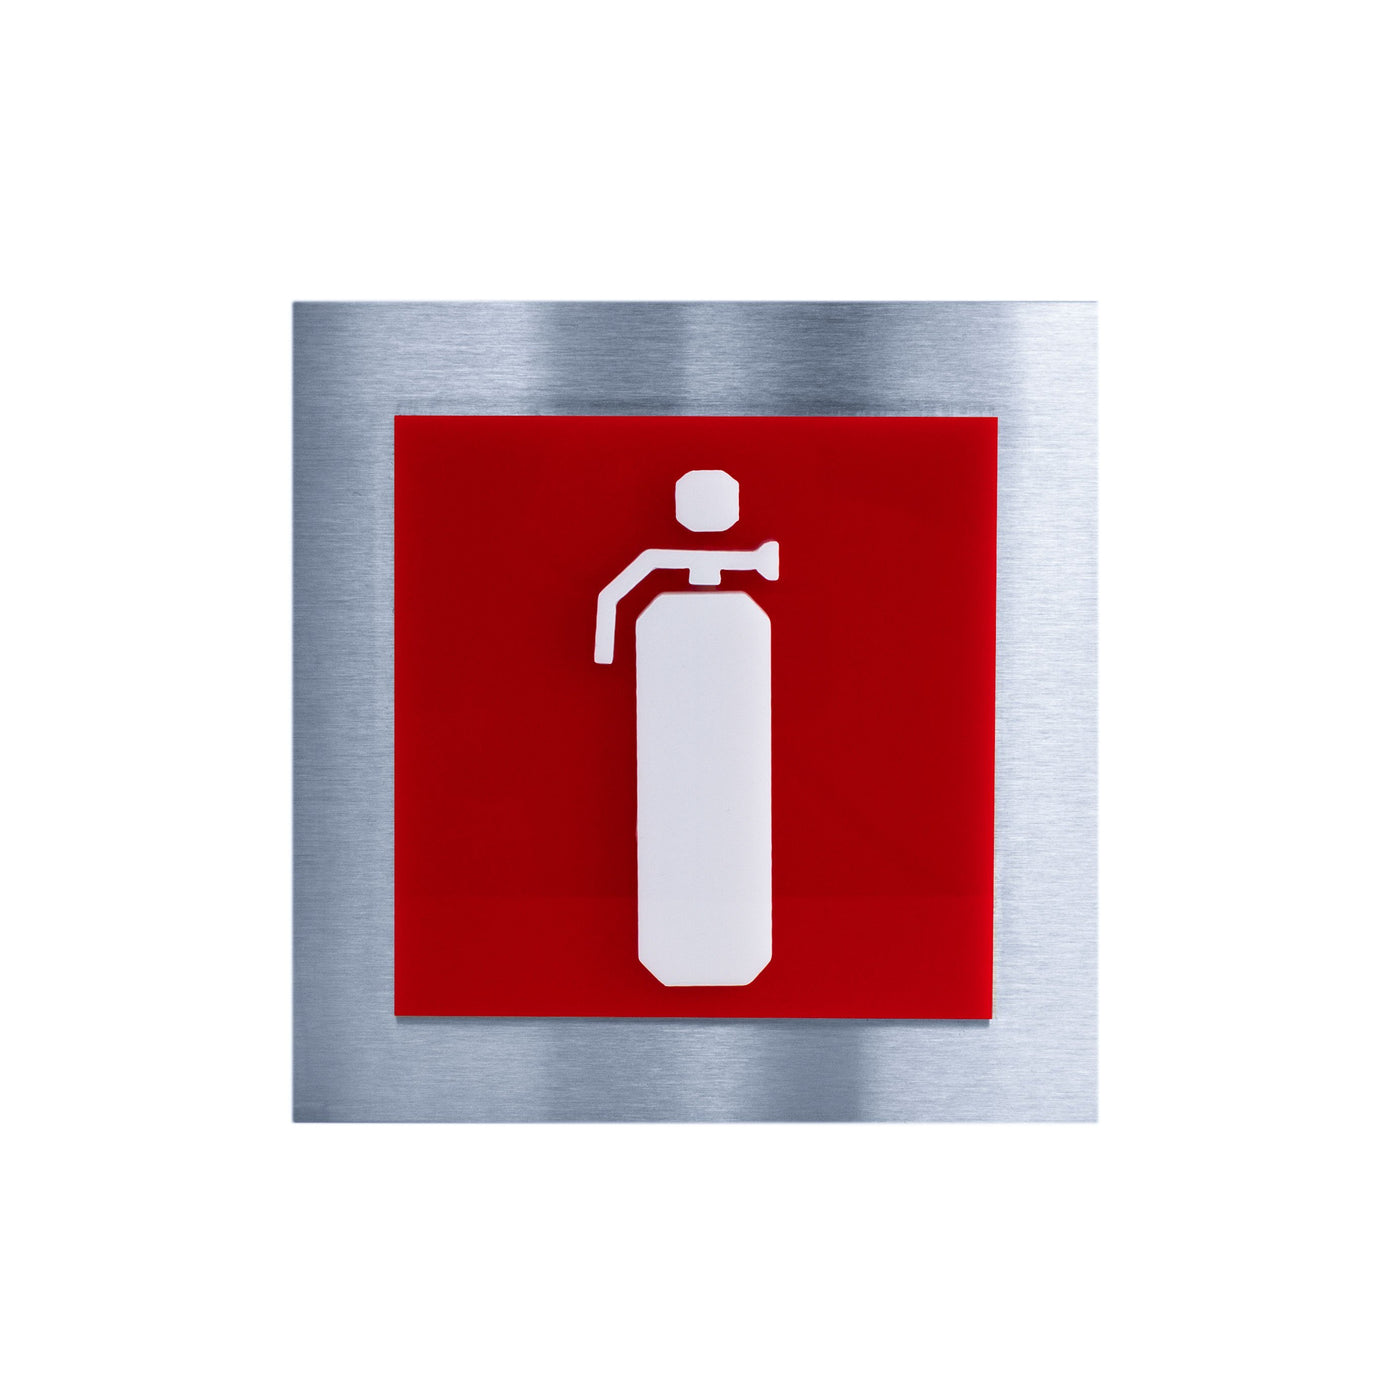 Extinguisher Steel Safety Signage Information signs gray/red/white Bsign